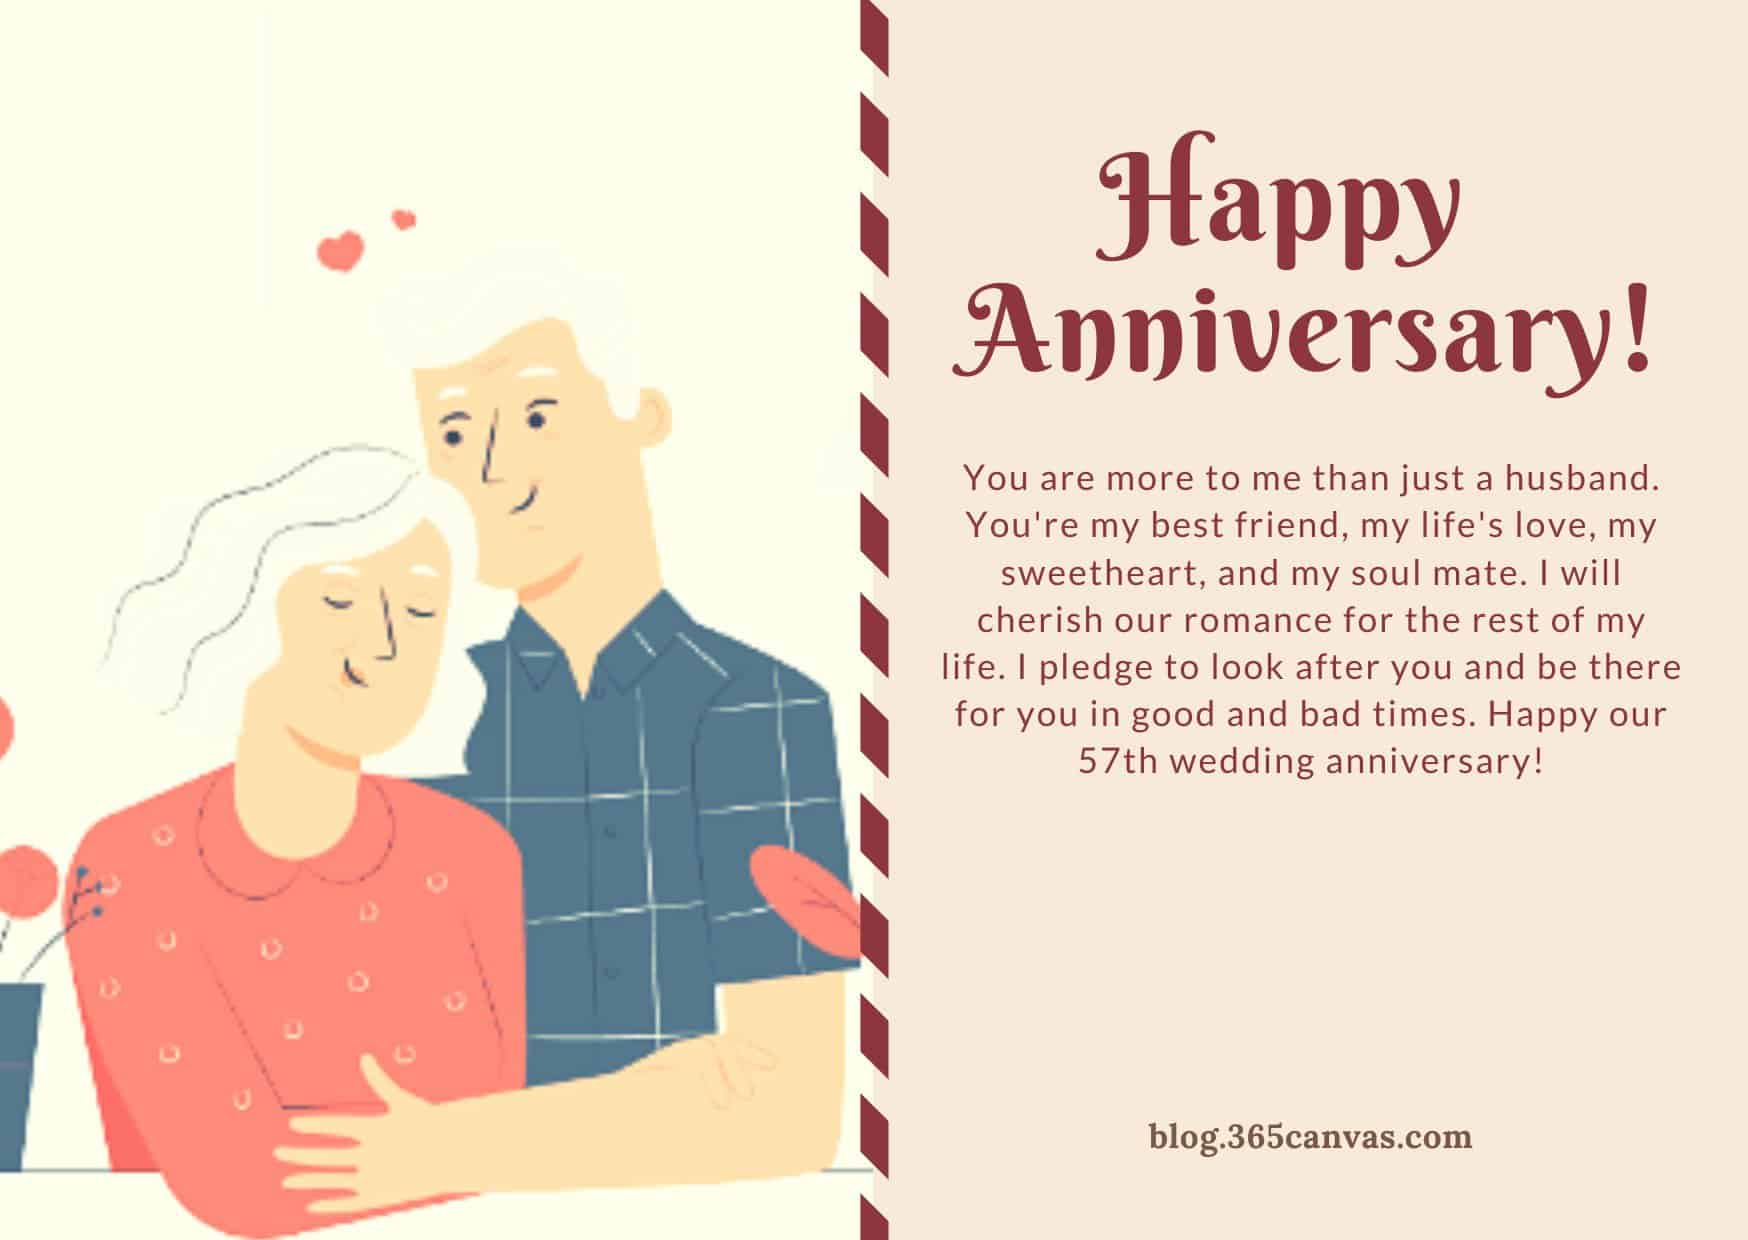 happy 57-Year Anniversary wishes for Husband